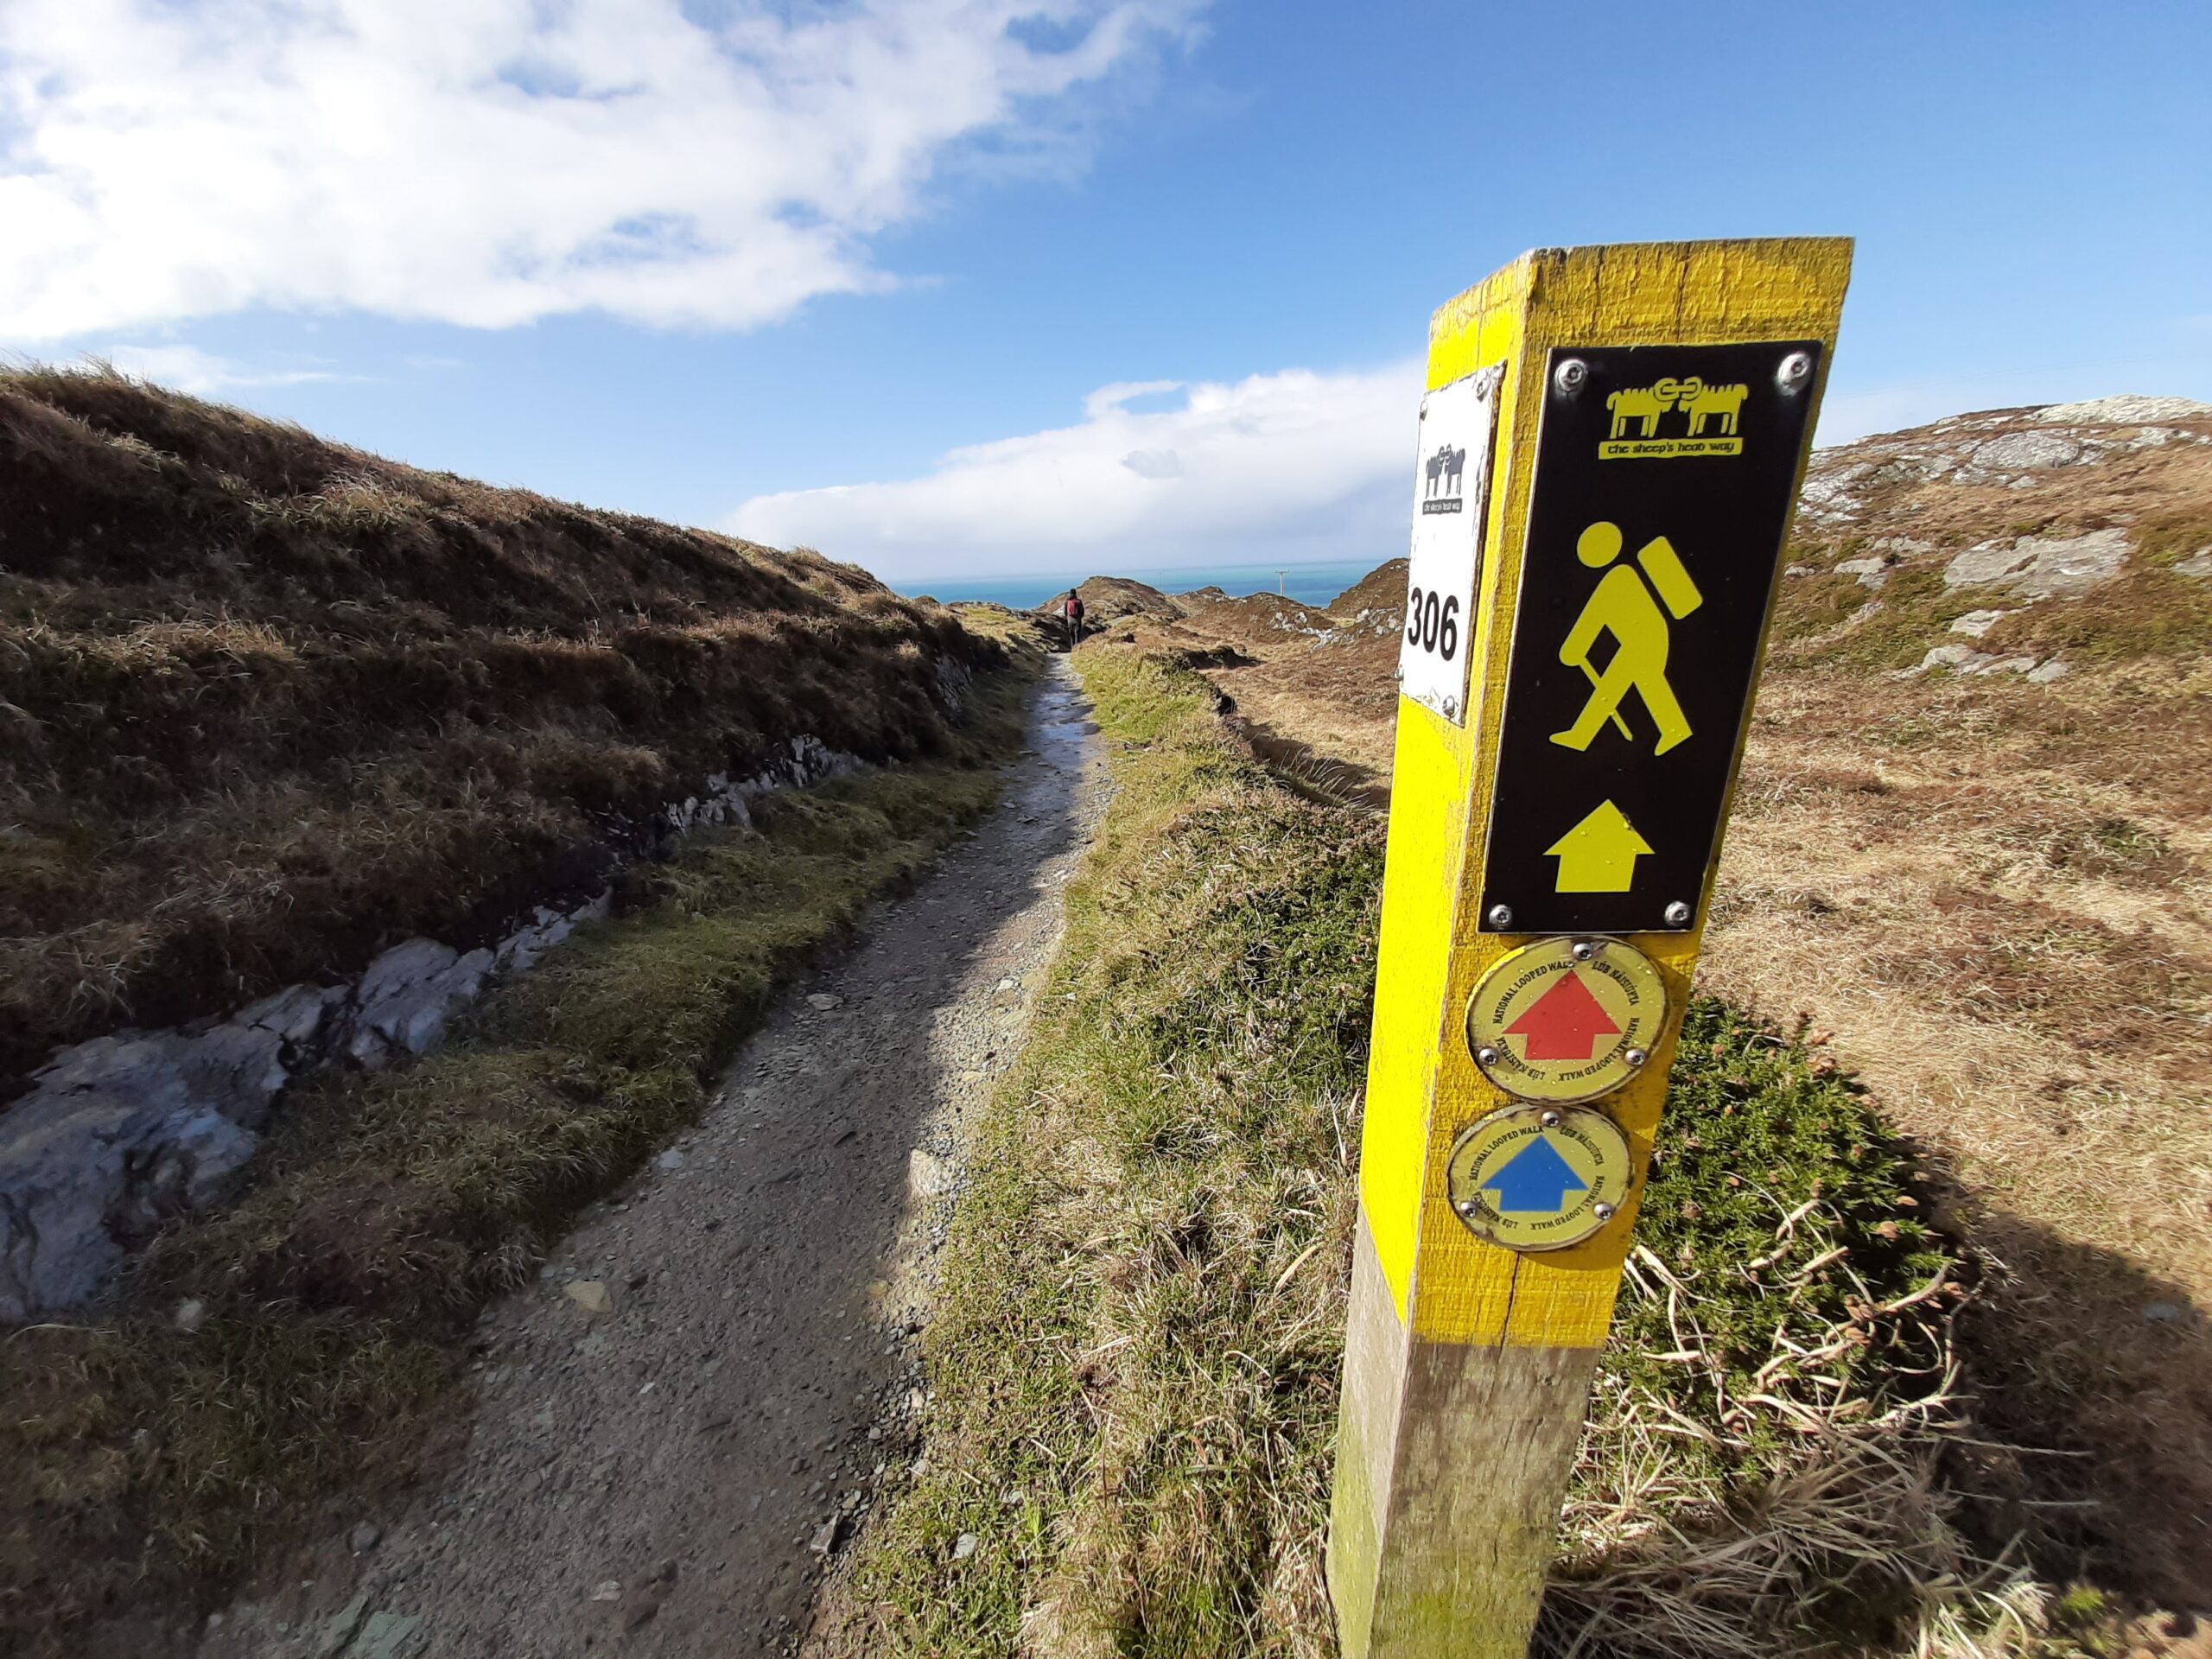 The trails on the Sheep's Head Peninsula are well signposted.